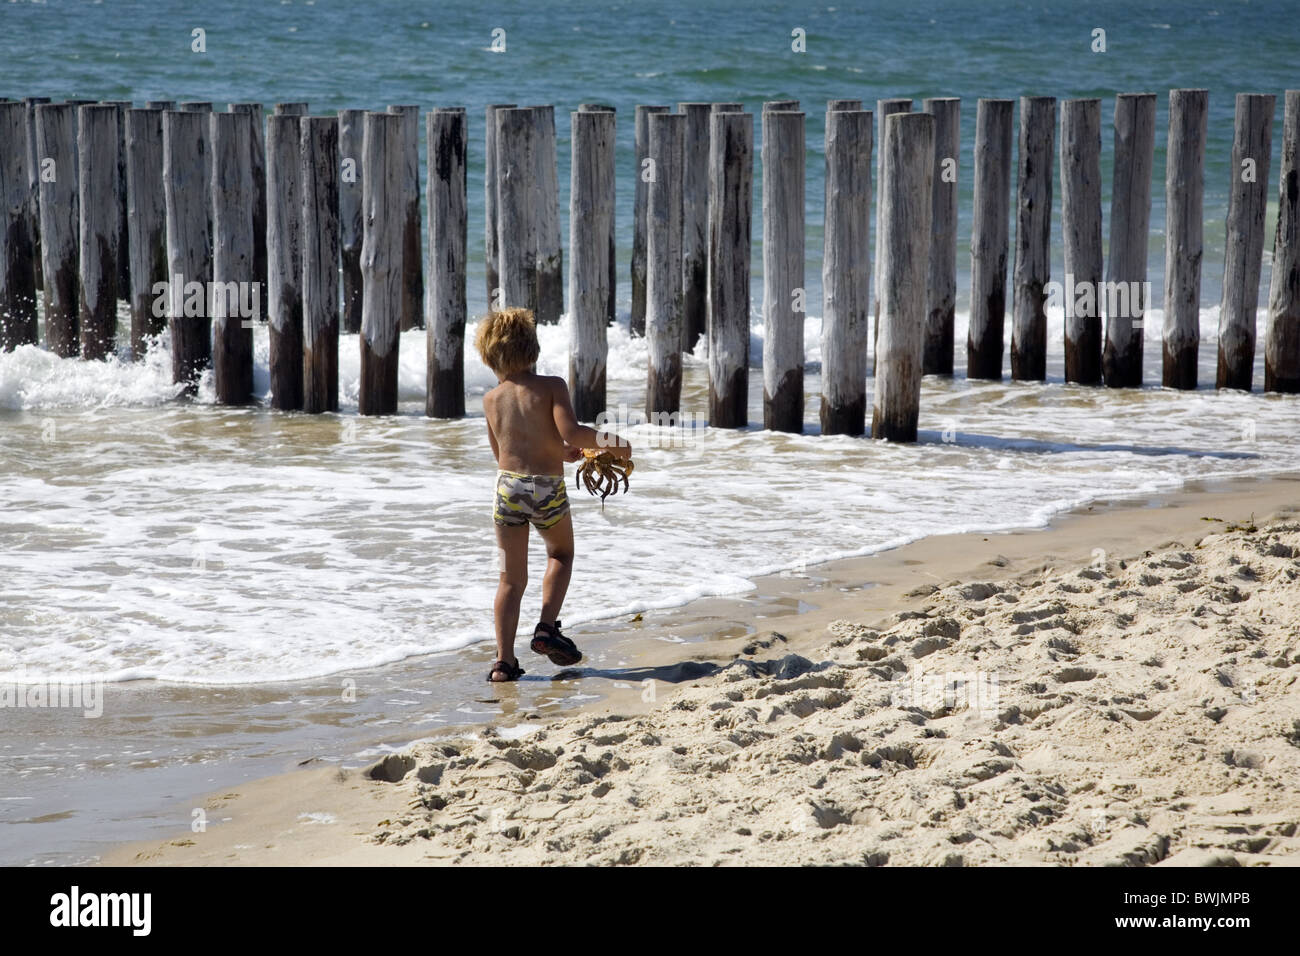 Boy on a beach carrying a big crab with the poles of a groin in the background, Haamstede, Zealand, Netherlands Stock Photo